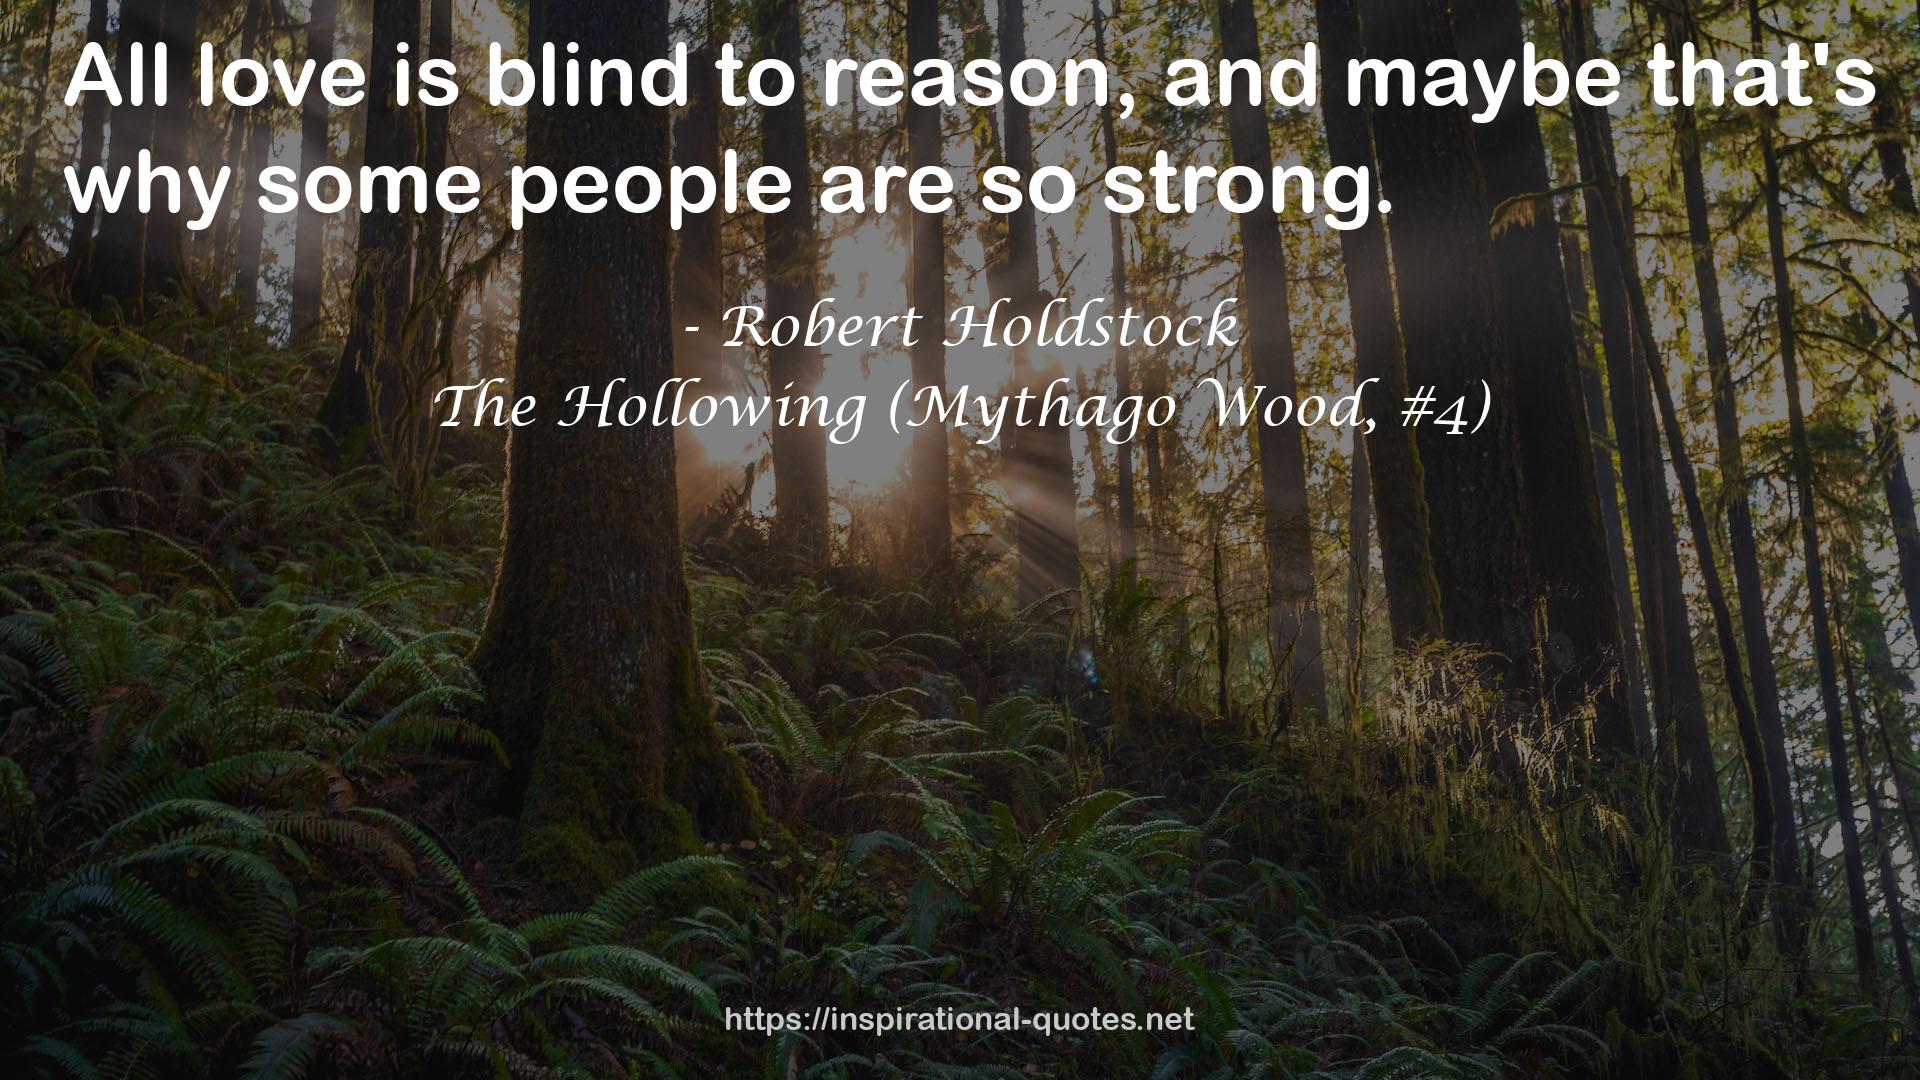 The Hollowing (Mythago Wood, #4) QUOTES